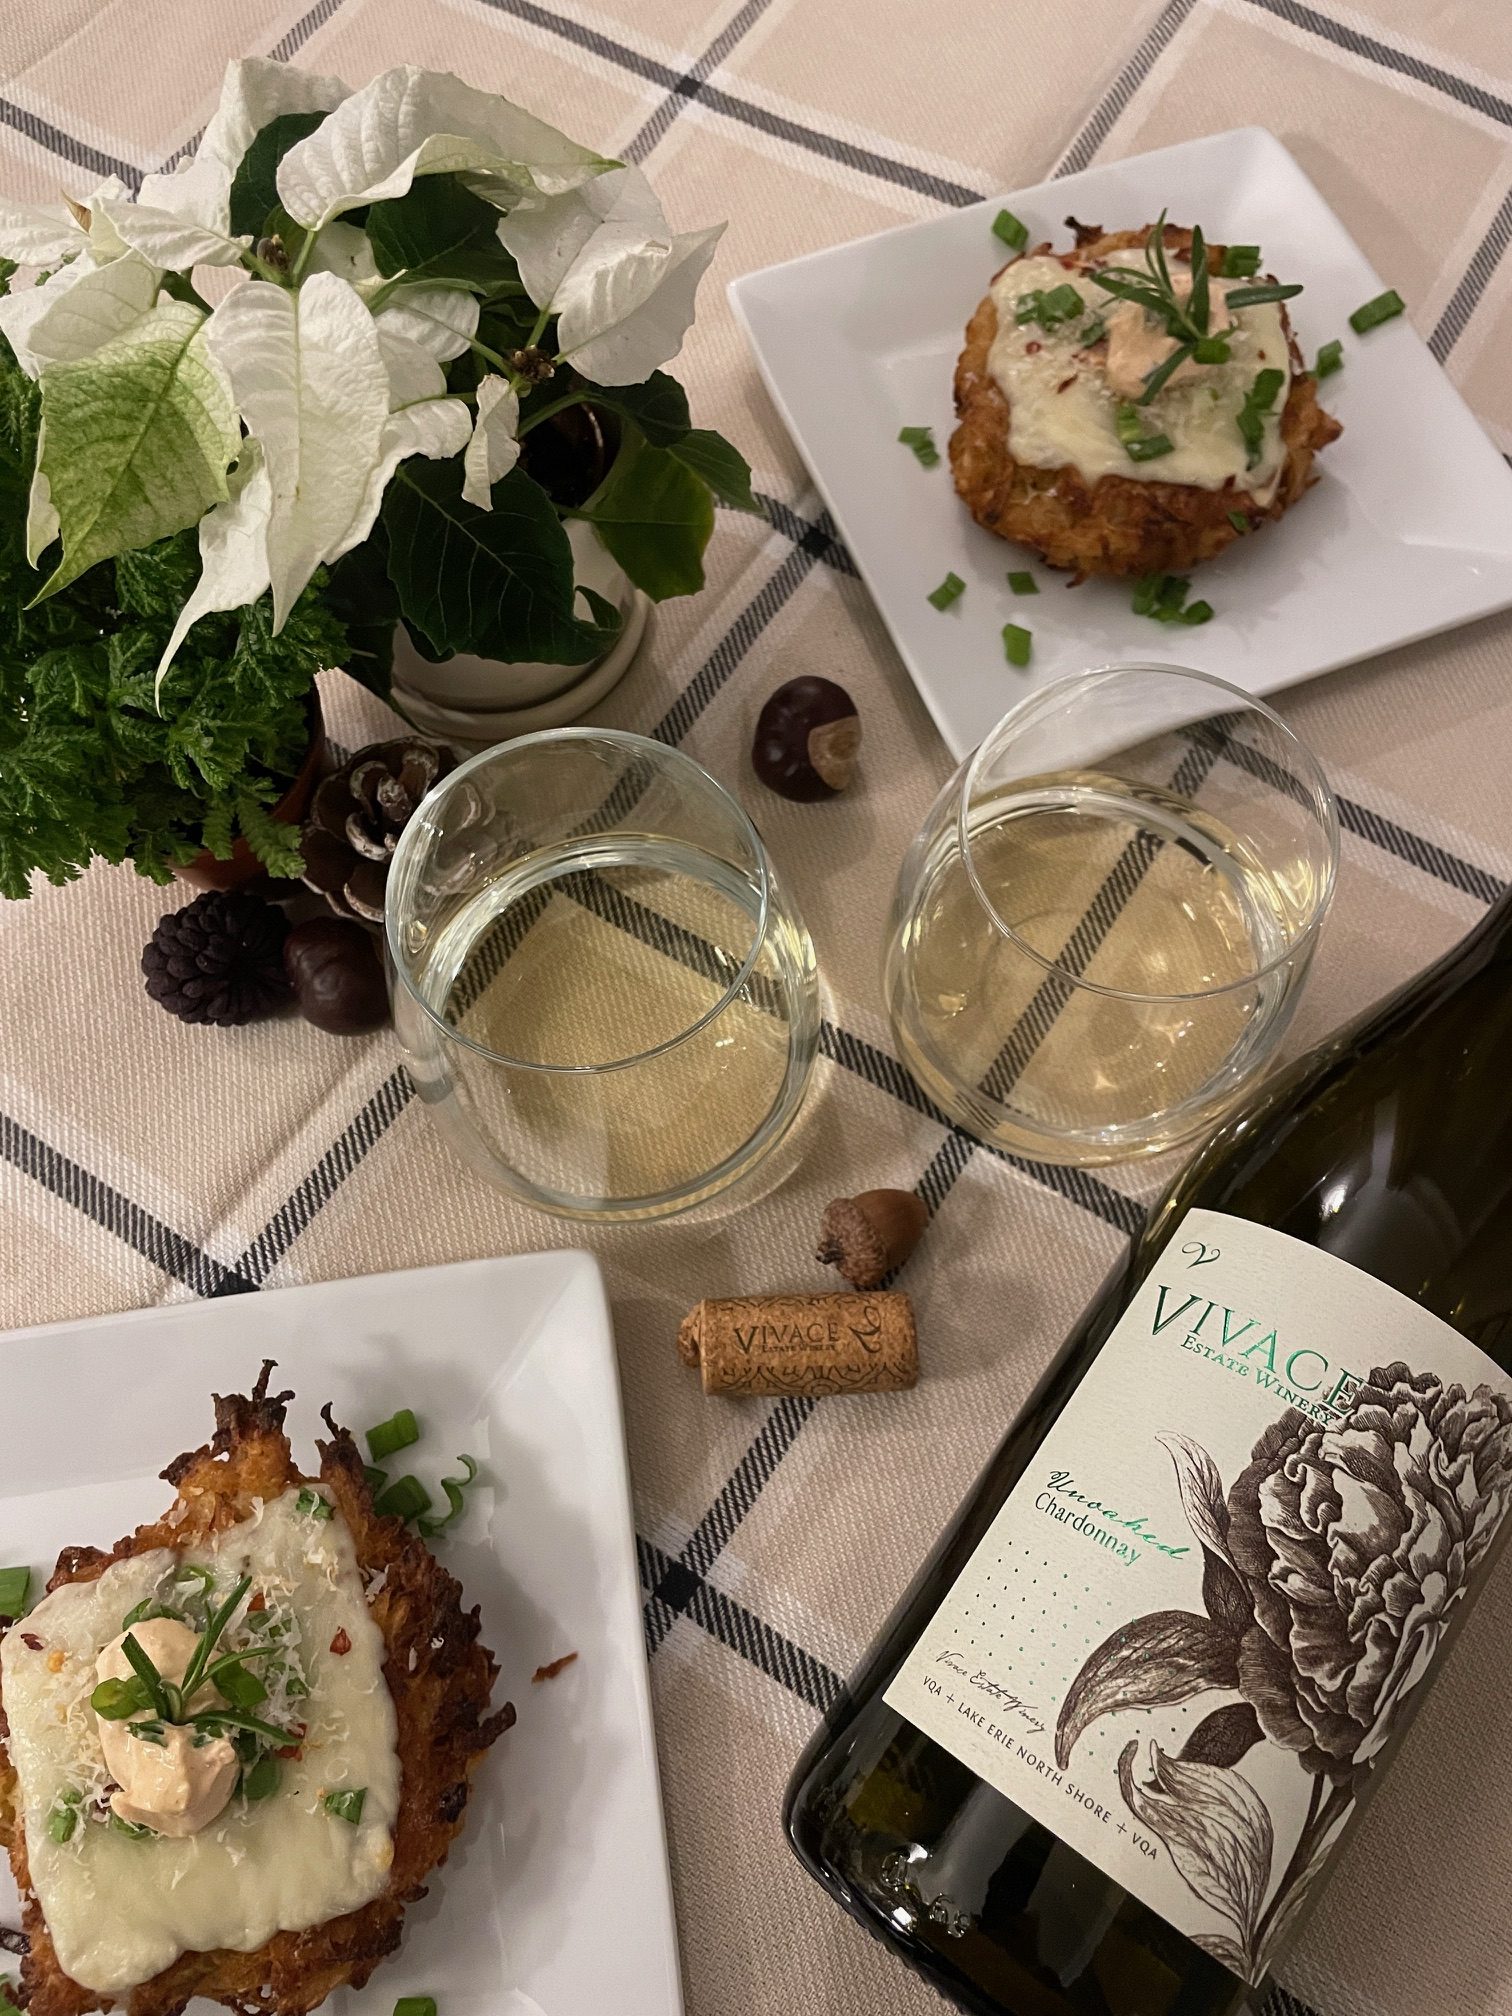 Featured image for “Viavace Estate Winery 2021 Unoaked Chardonnay VQA with Pizza Latkes.”